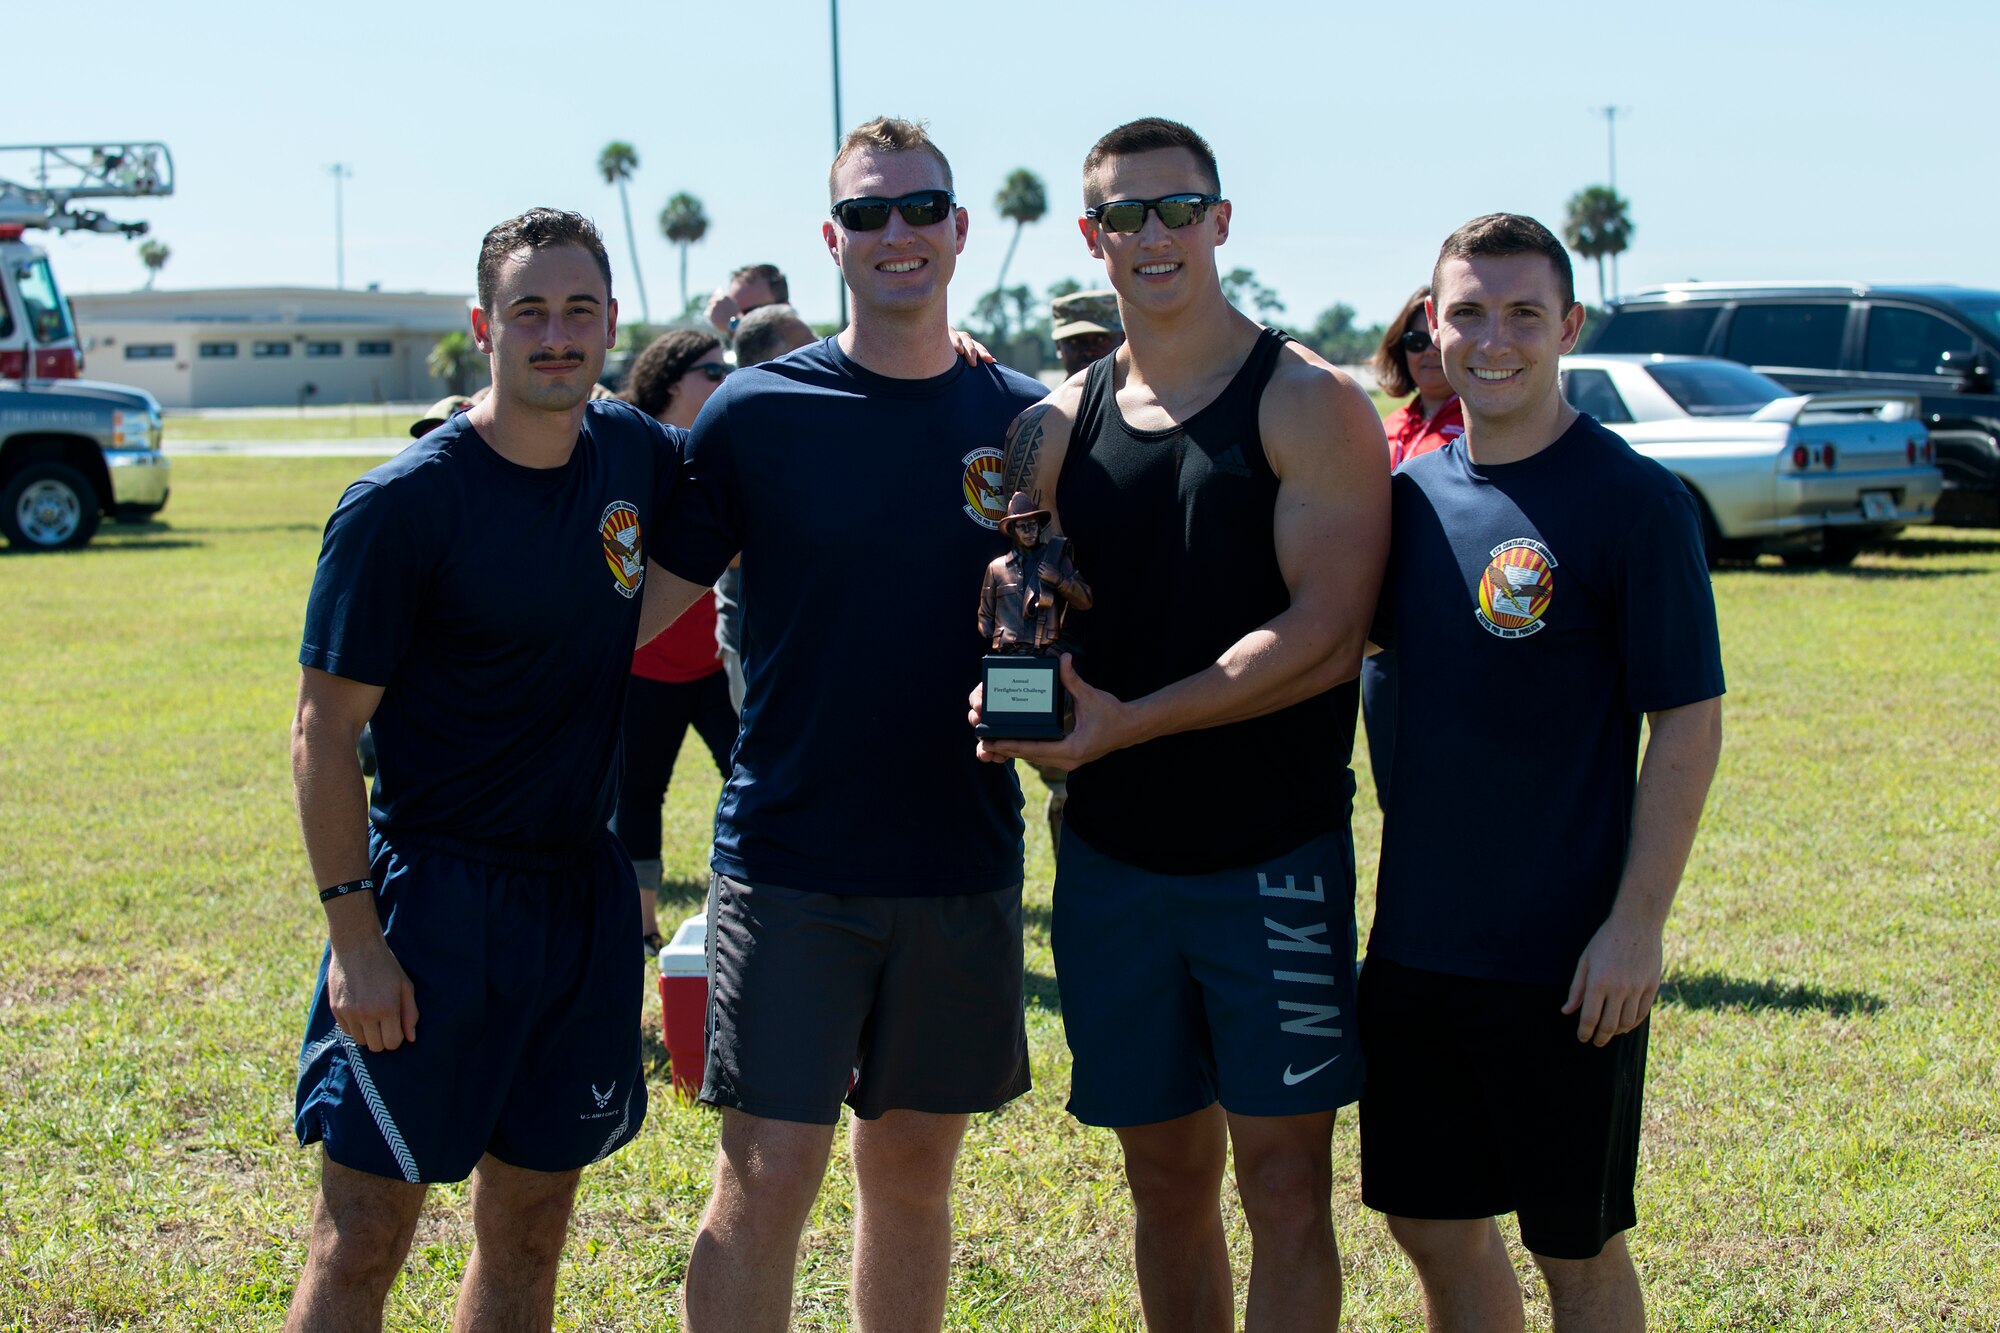 The 2018 Fire Muster winning team from the 6th Contracting Squadron pause for a photo at MacDill Air Force Base, Fla., Oct. 12, 2018.